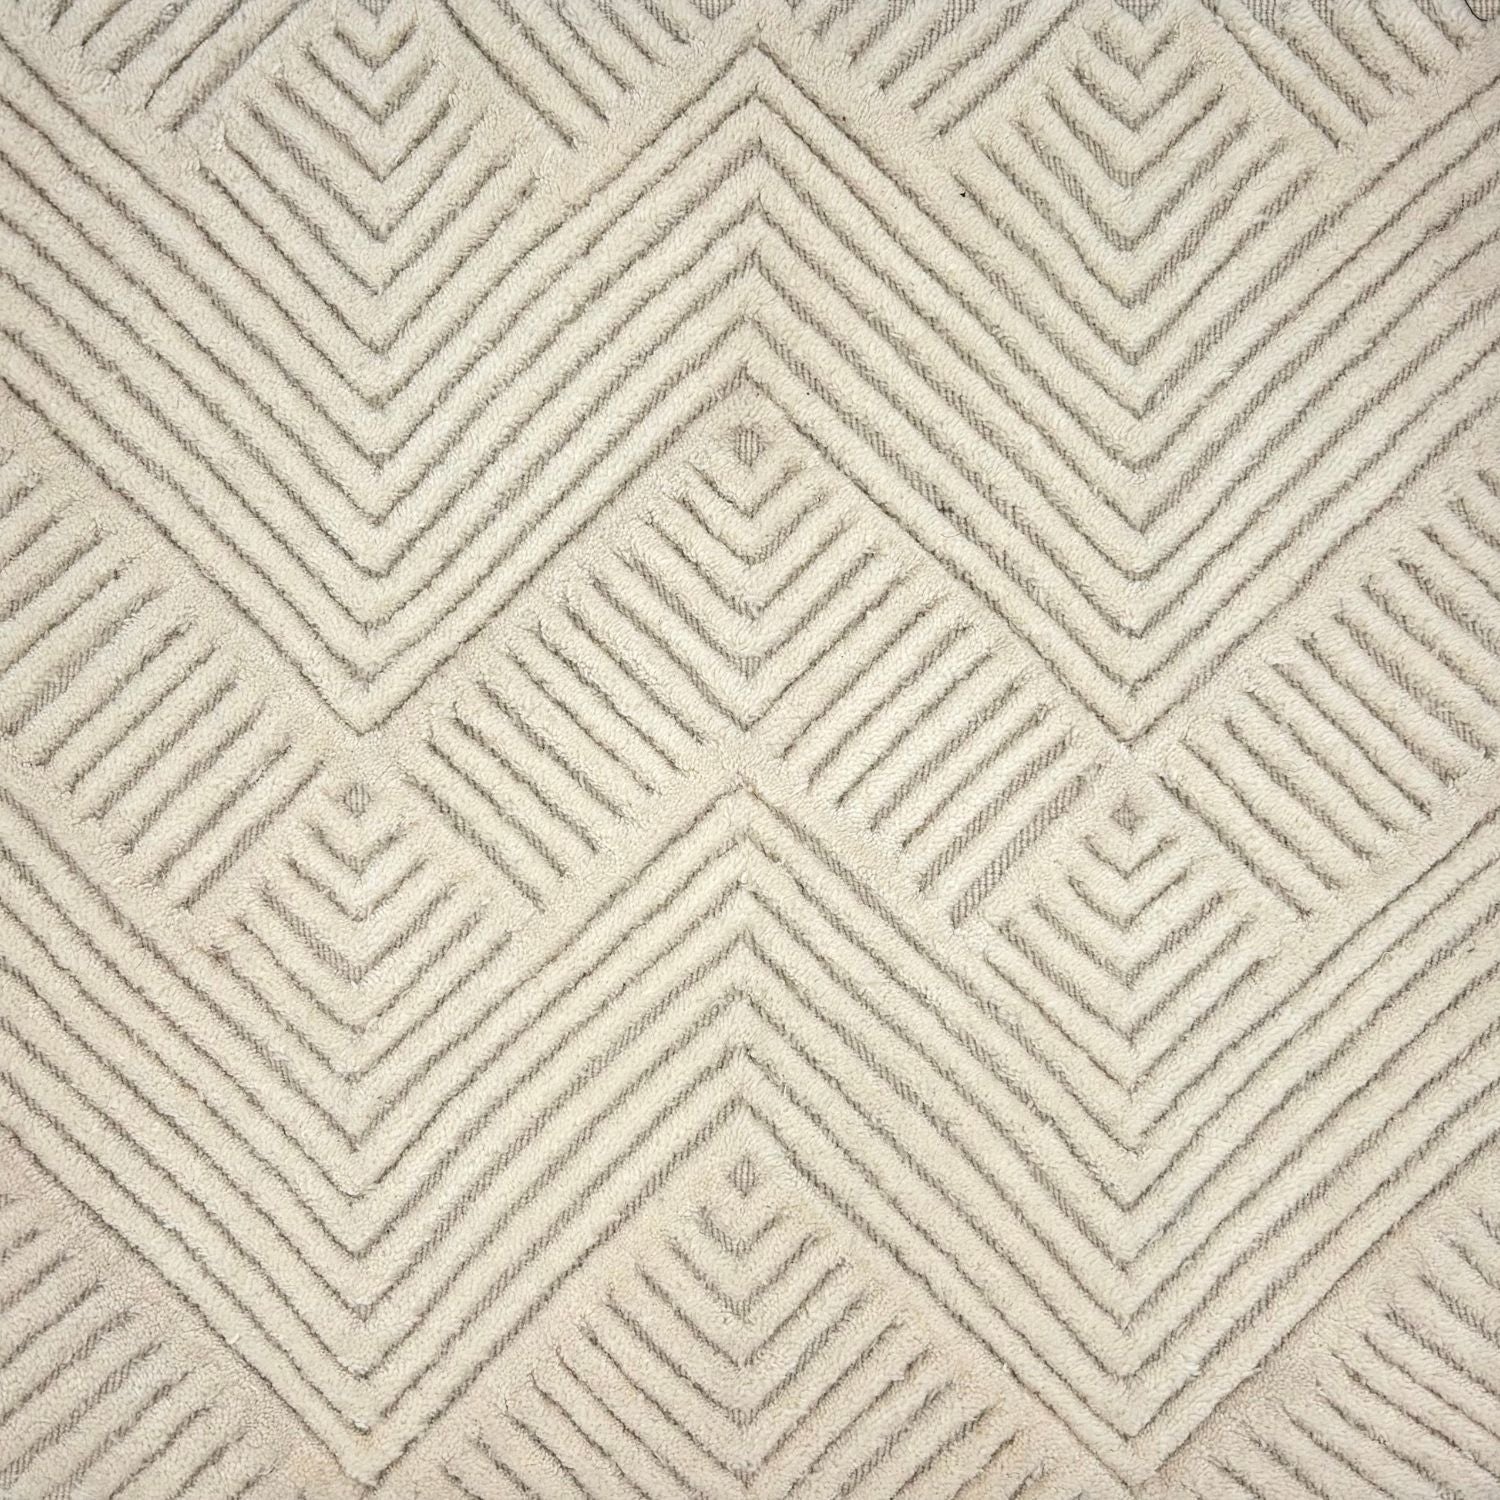 An ivory rug with a repeating raised chevron pattern on an ivory ground.